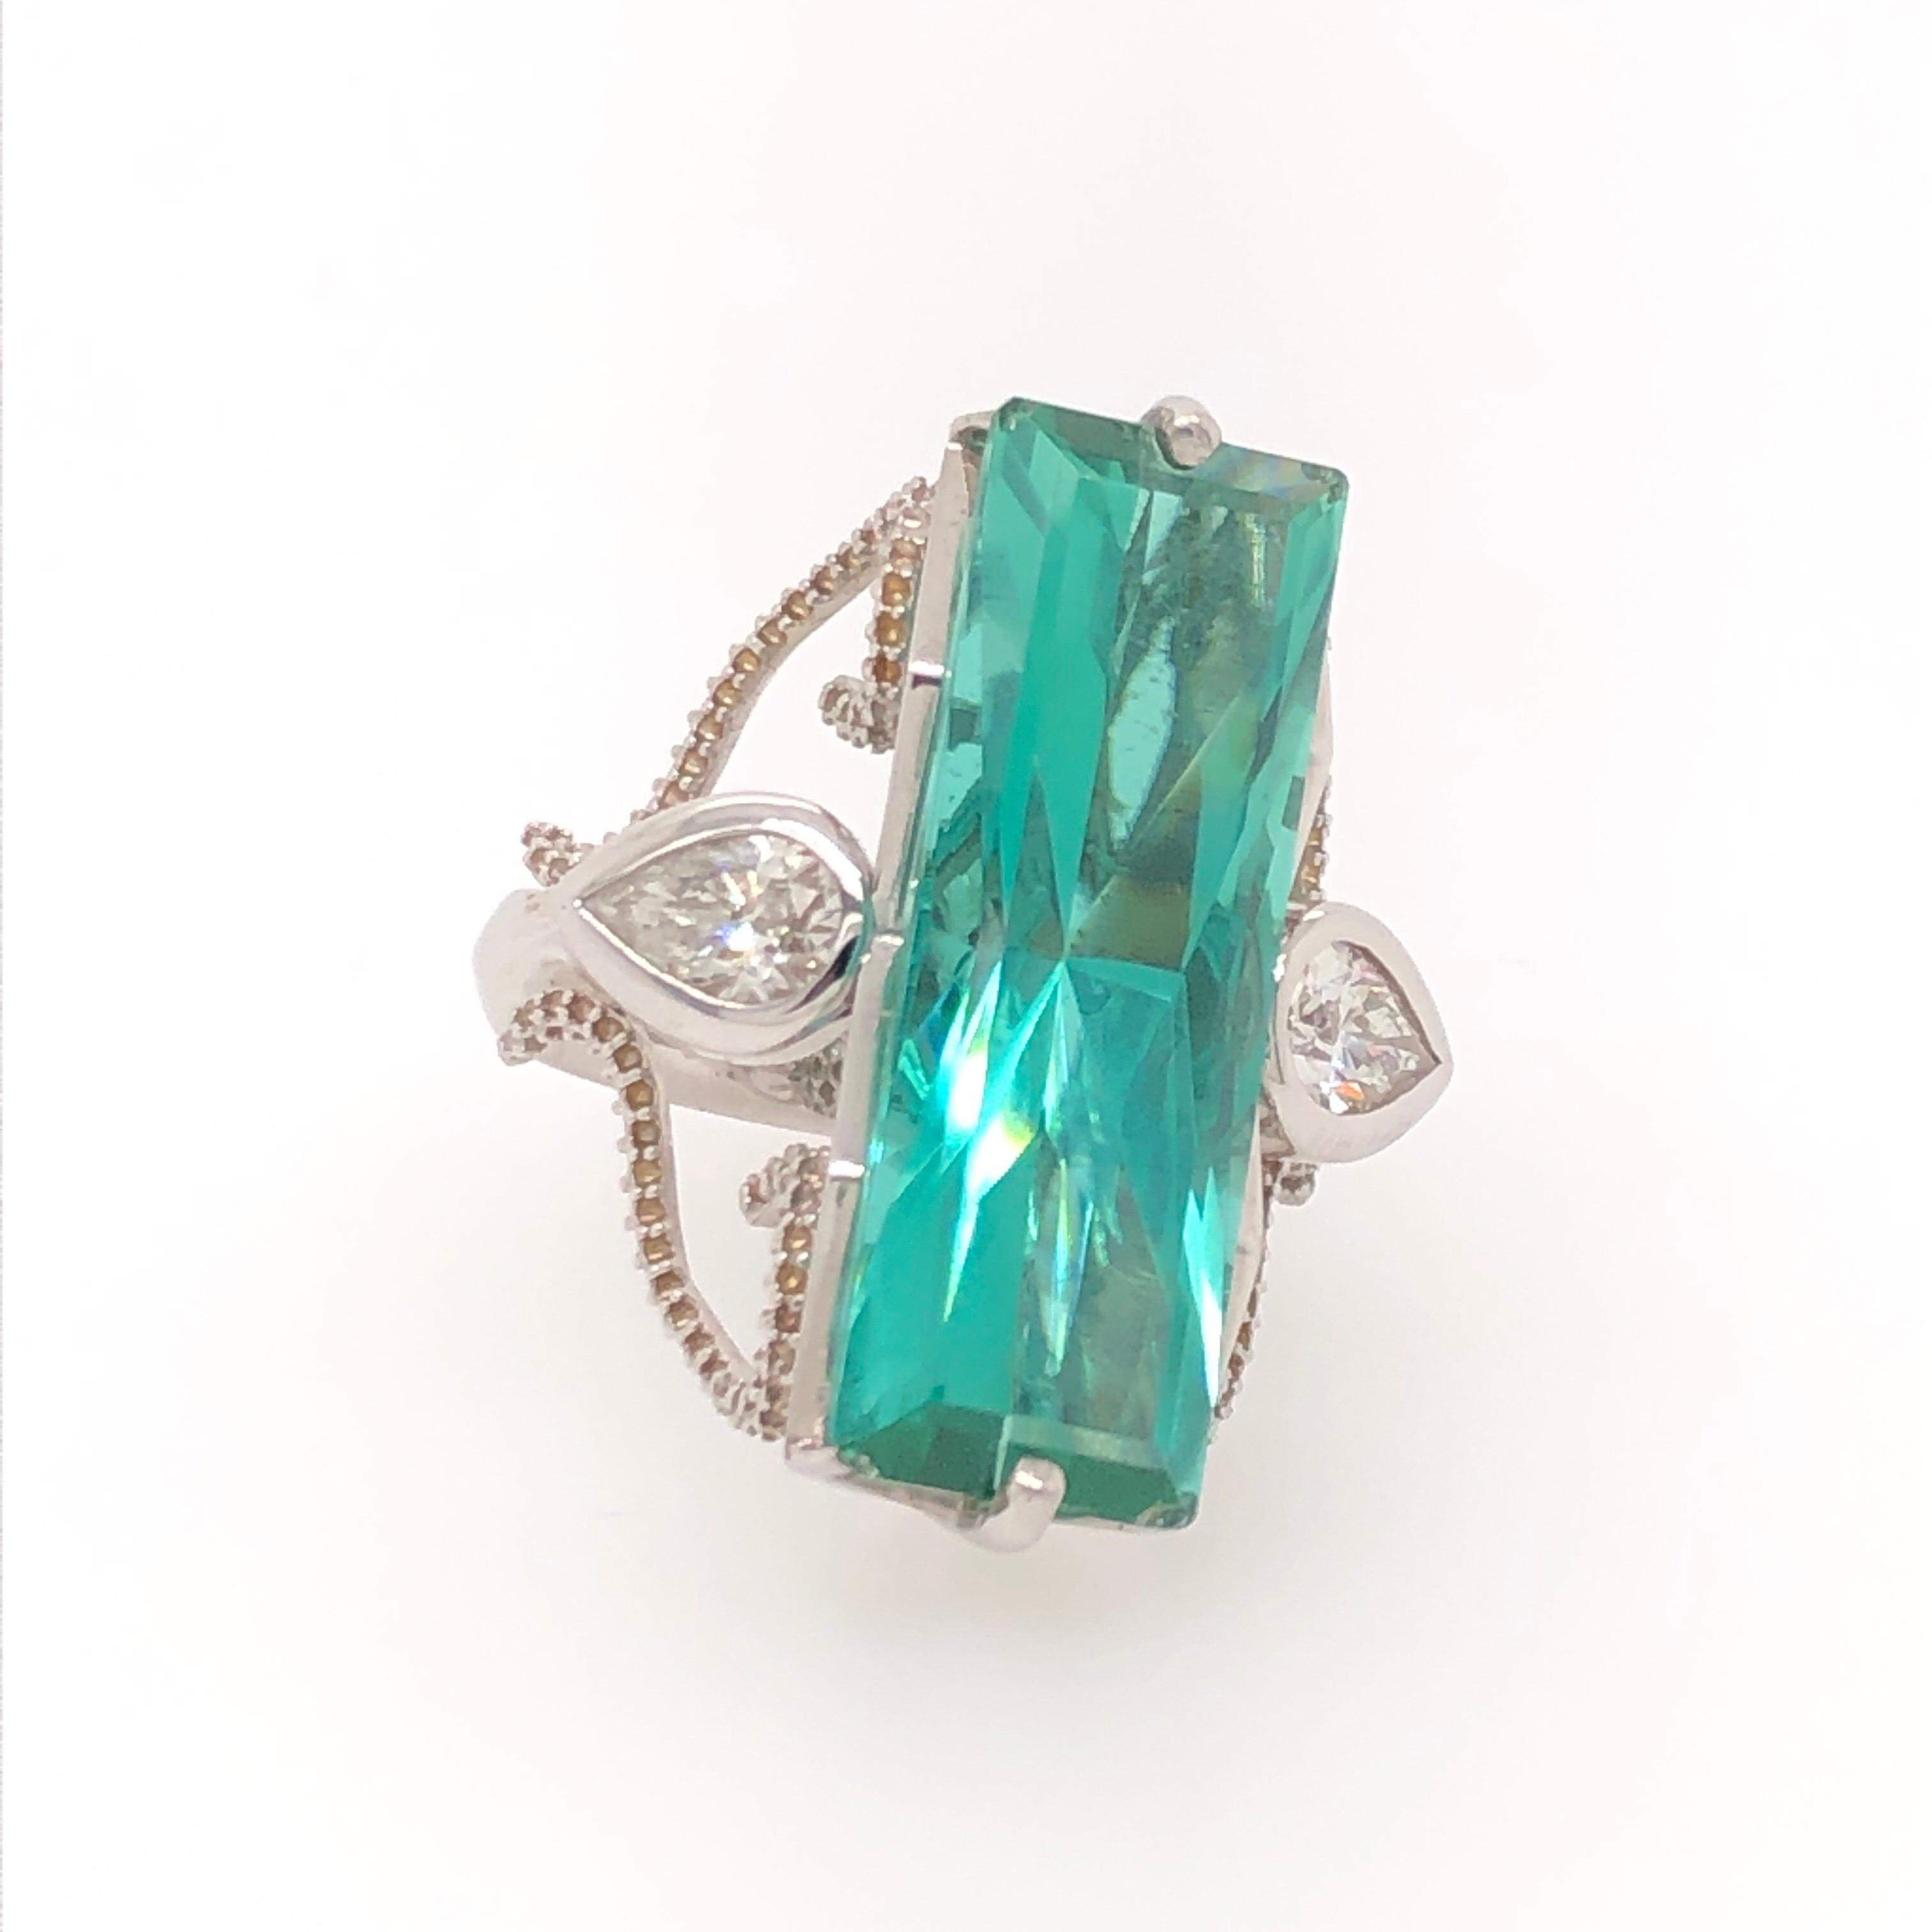 Where most teal tourmaline of this impressive size have copper in them, this extremely rare teal Afghan tourmaline is flawless. Master level artist, Trent Mann, designed the unique and beautiful 14K white gold ring in addition to cutting the 11.96